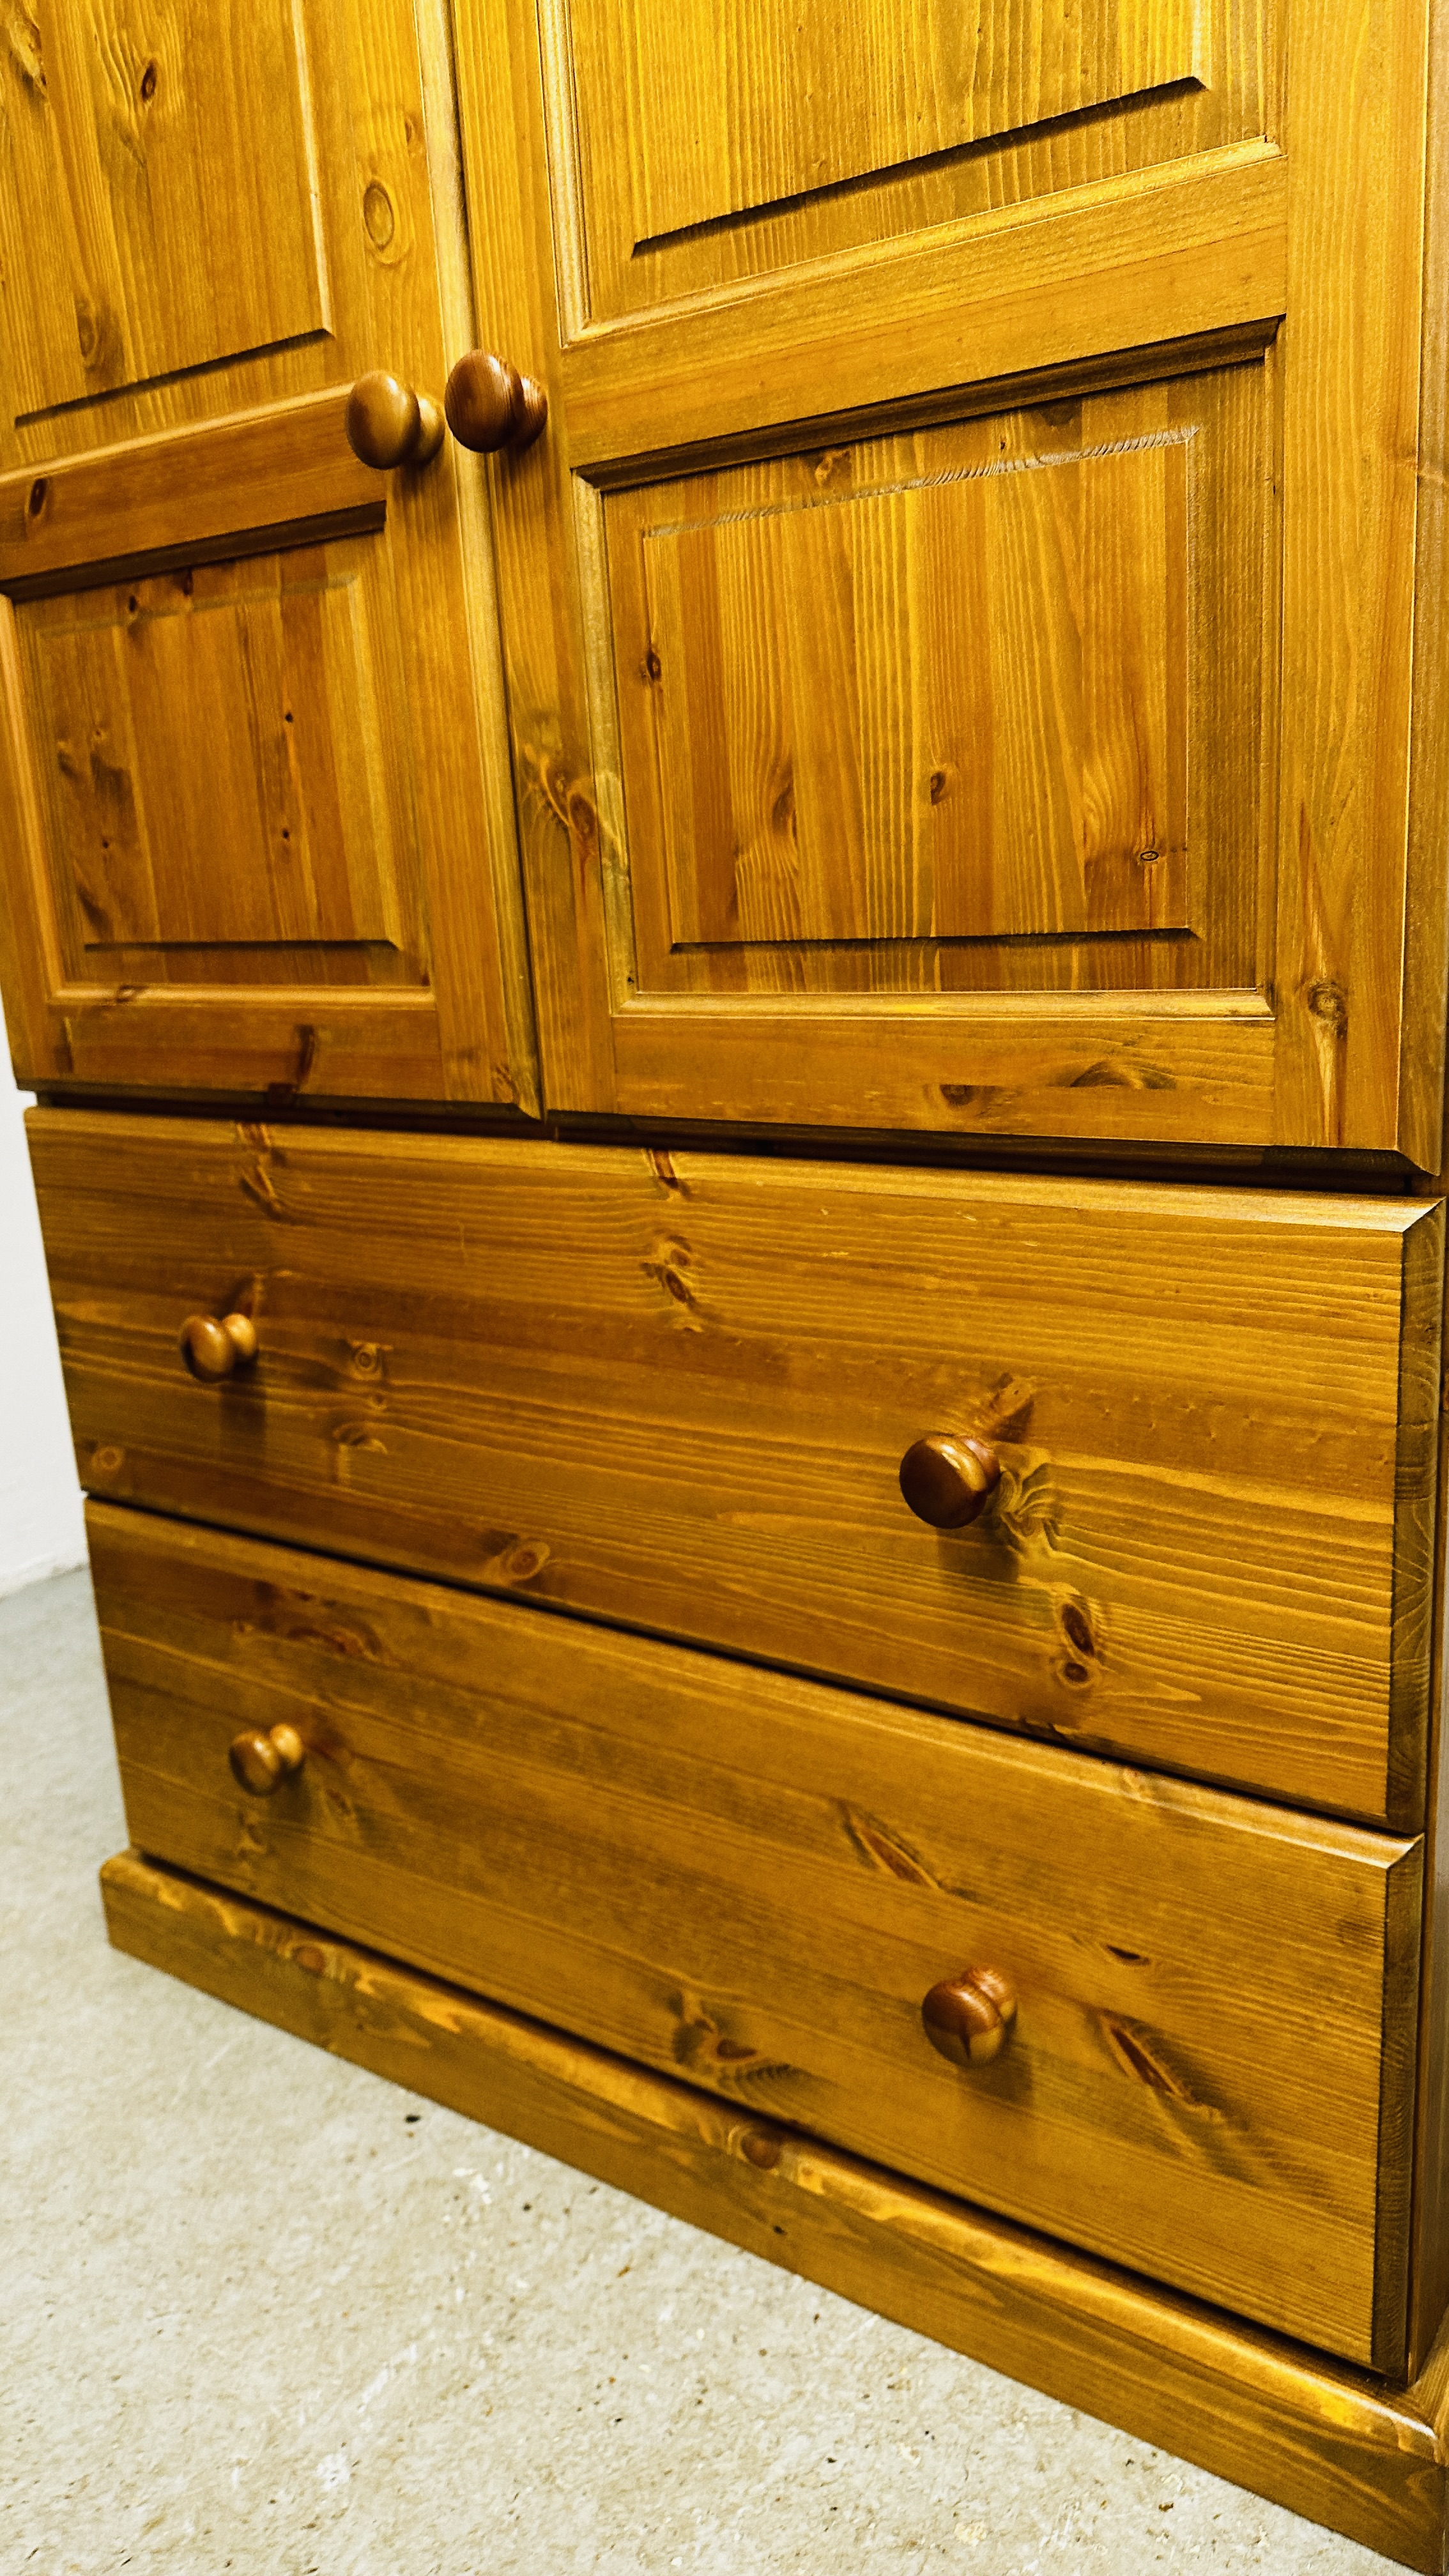 A SOLID PINE TWO DRAWER DOUBLE WARDROBE, W 90CM X D 53CM X H 179CM. - Image 5 of 8